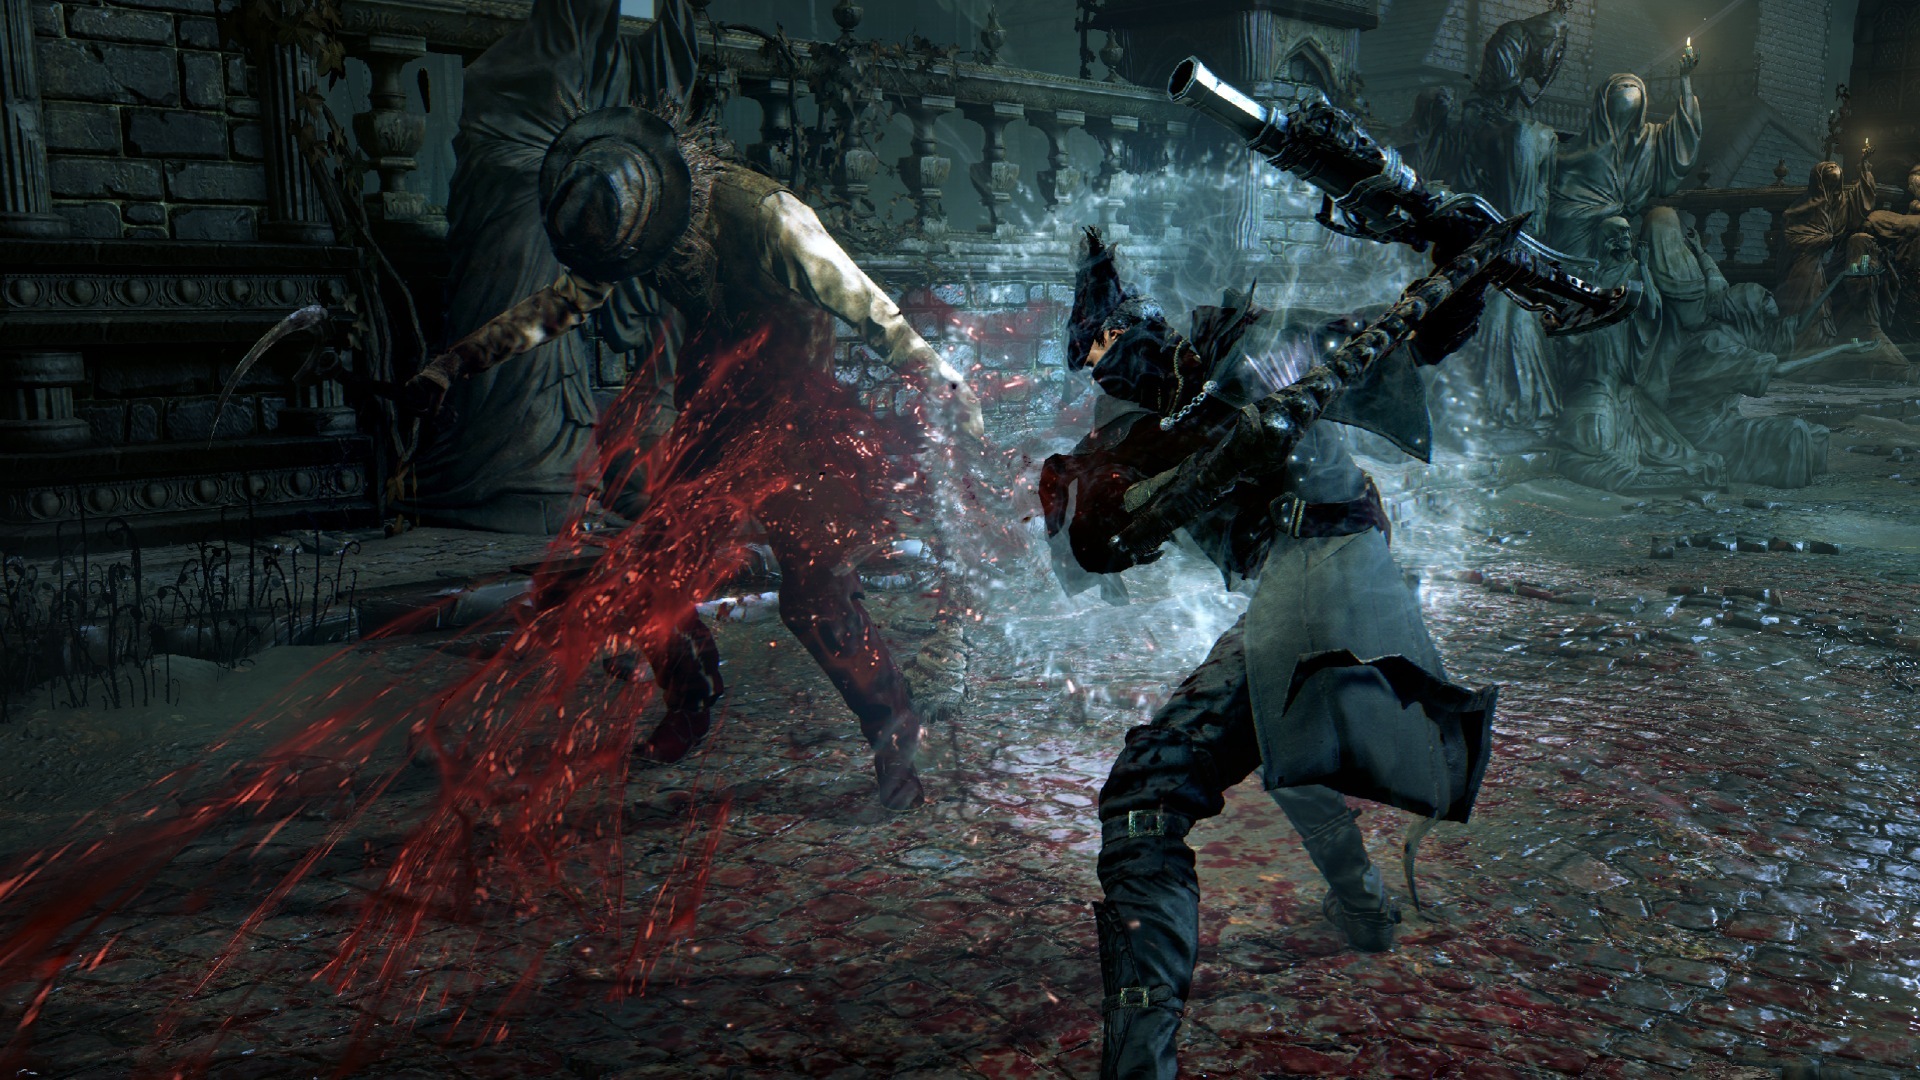 BLOODBORNE PC CONFIRMED🔥, RELEASE DATE STEAM & EPIC GAMES